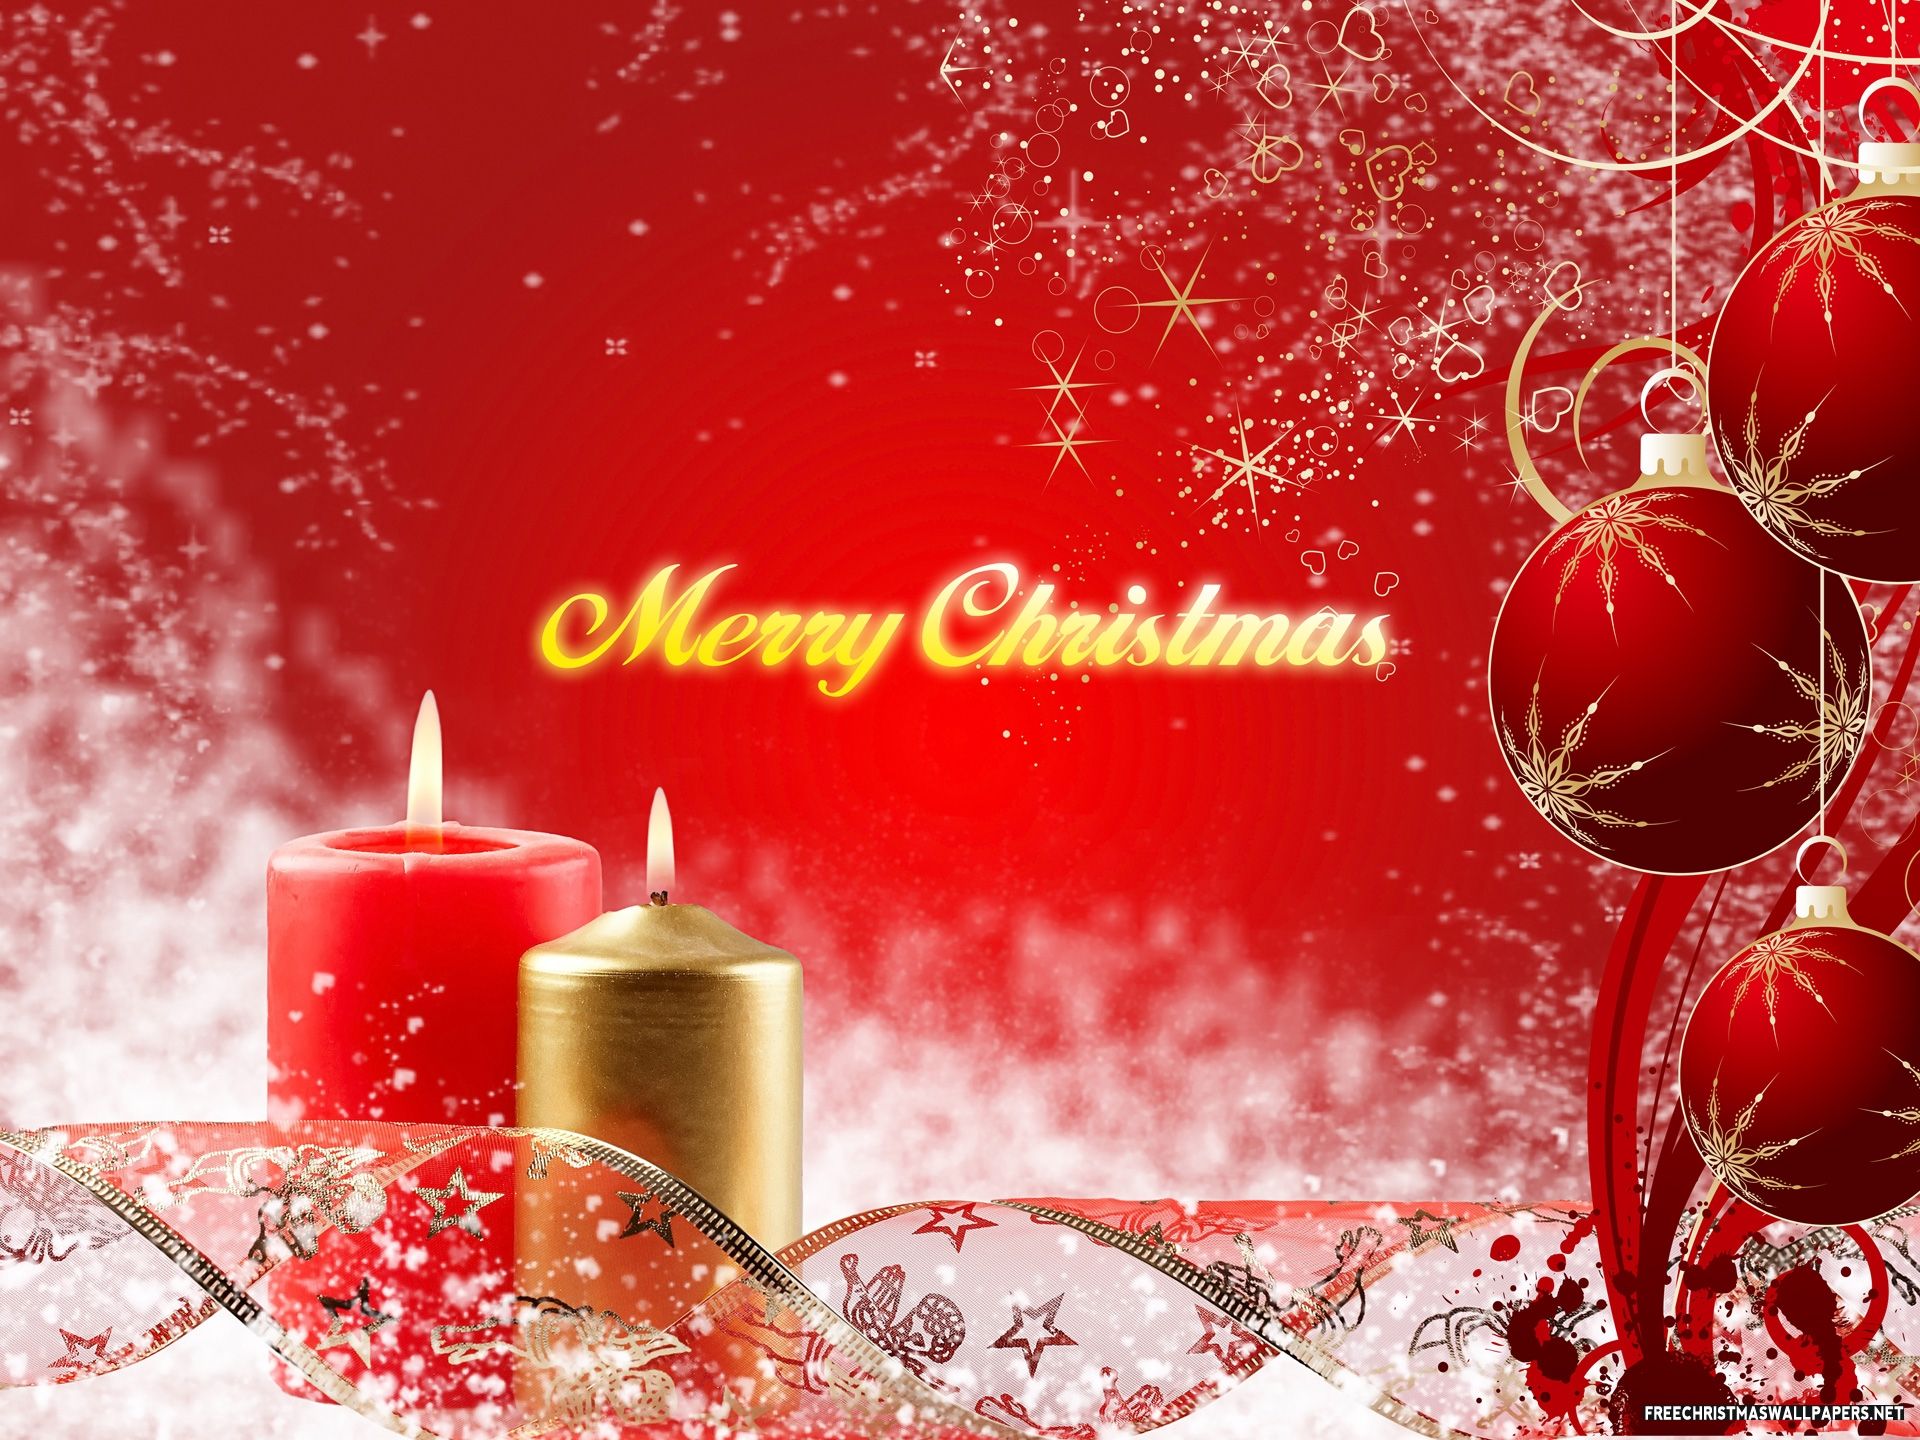 Advance Merry Christmas 2015 Images Pictures Whatsapp dp Fb Covers